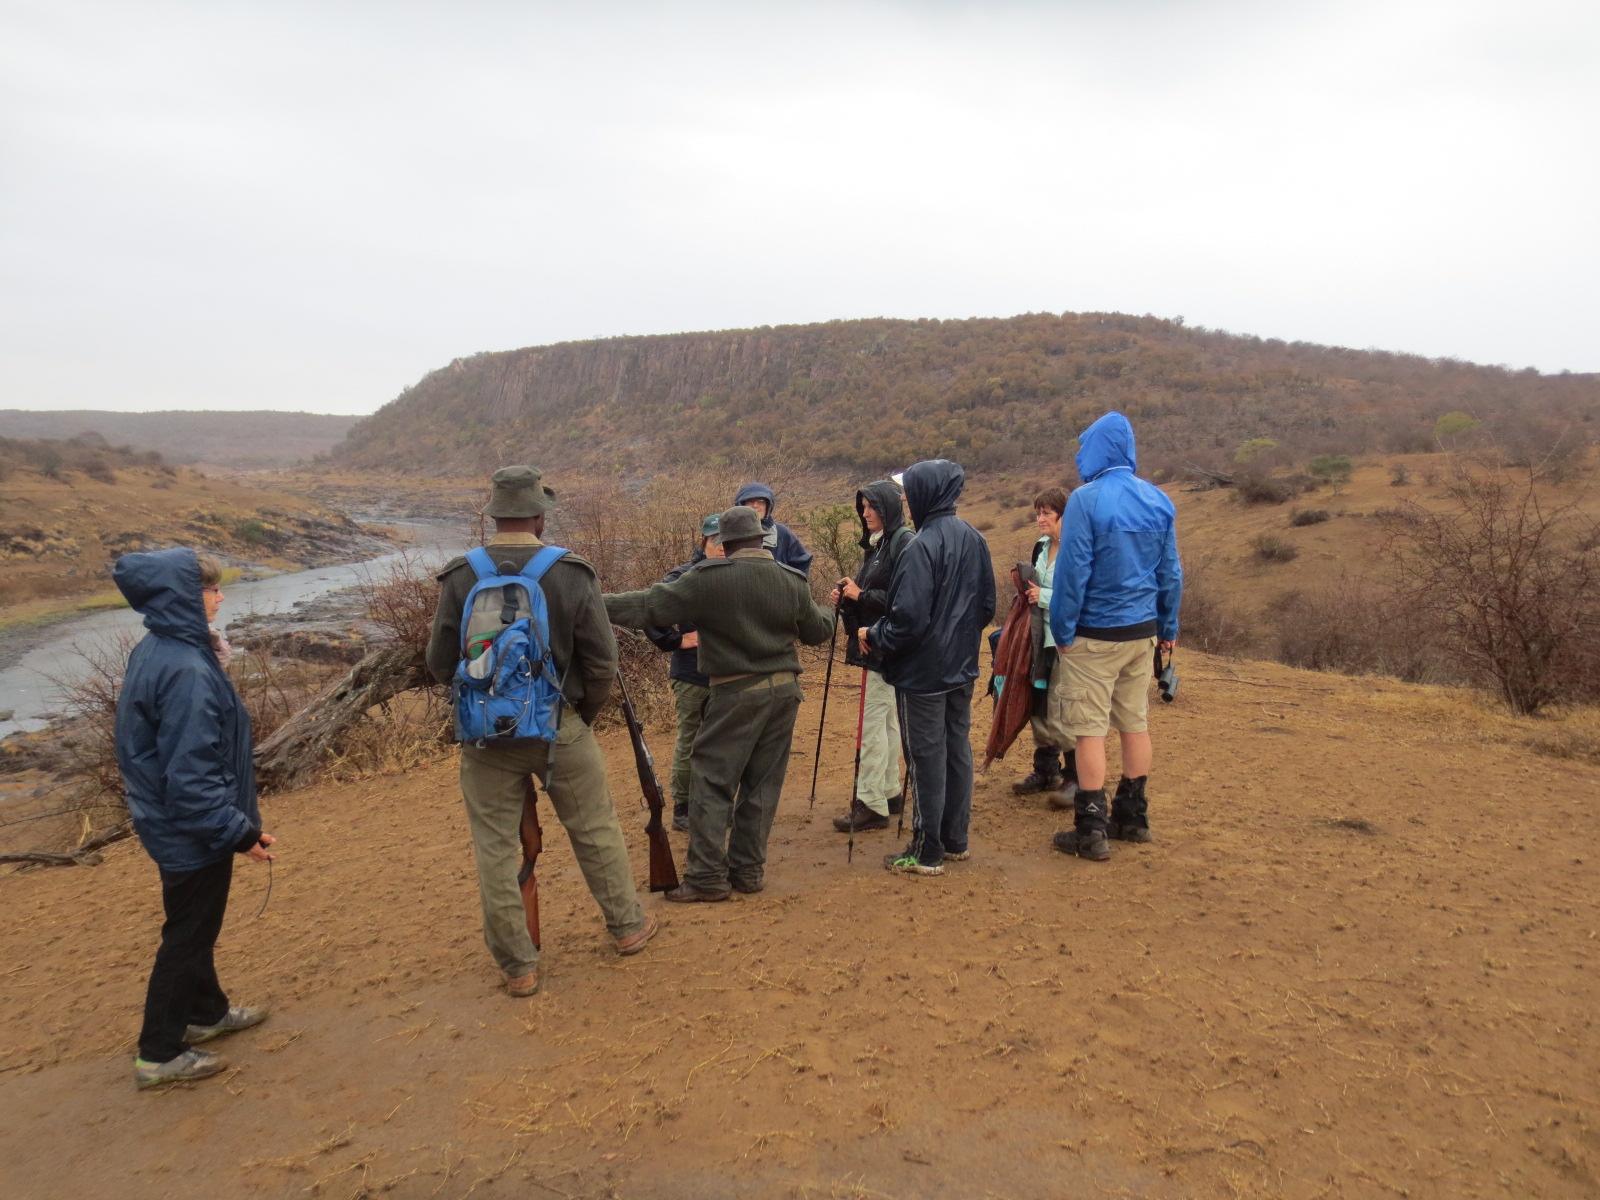 Last minute instructions from Aron, overlooking the Oliphant's river. The confluence is around the corner at the bask of the mountain on the right.